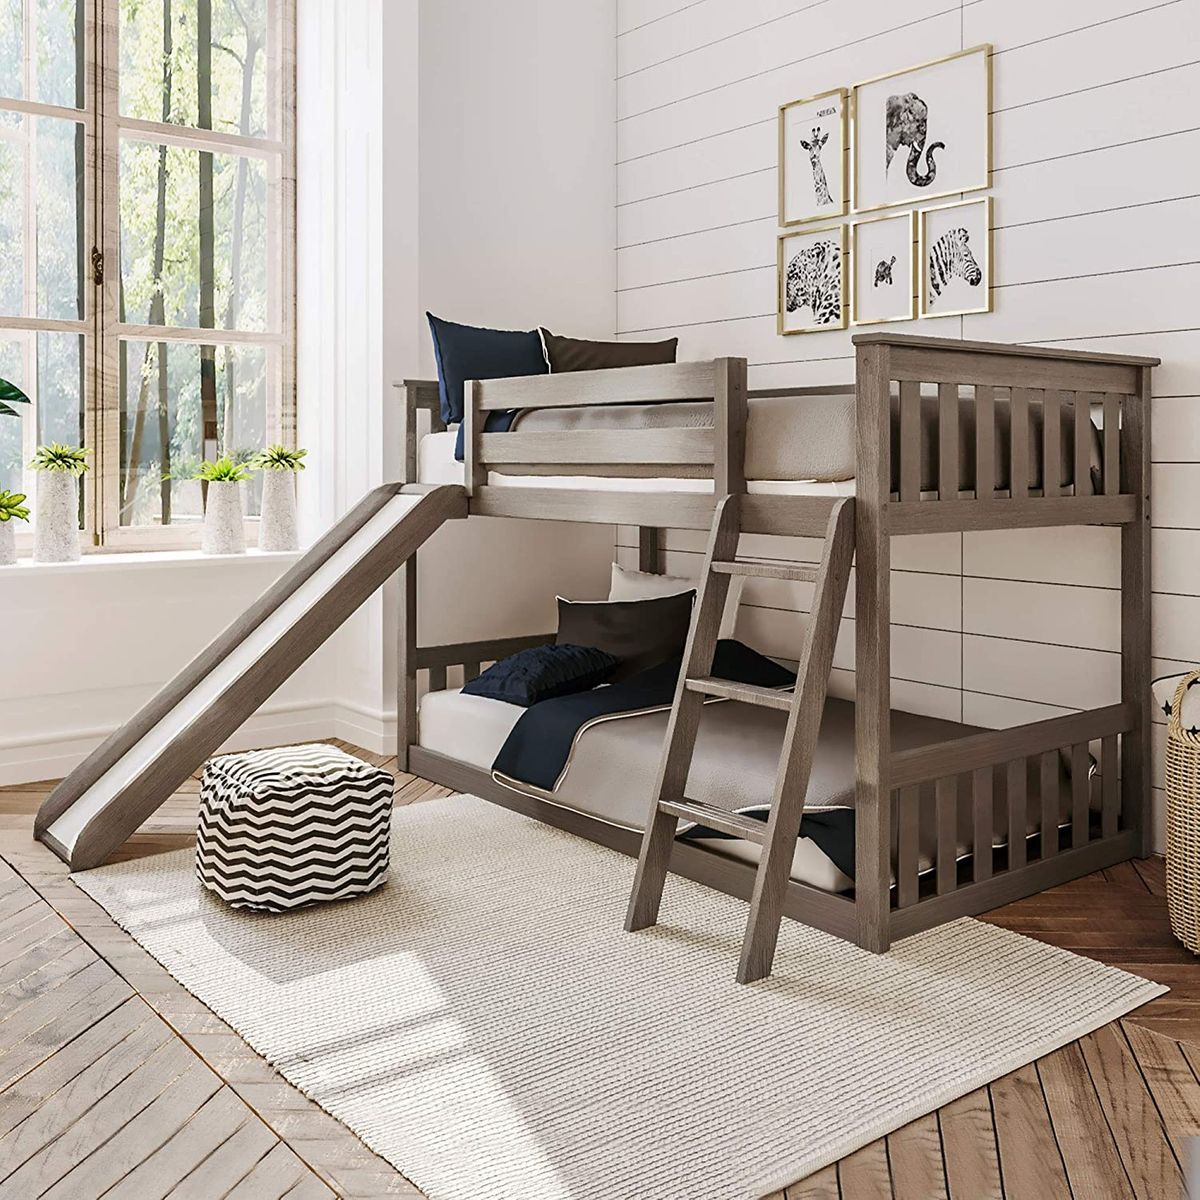 8 Best Bunk Beds 2020 The Strategist, Bunk Beds With Beds